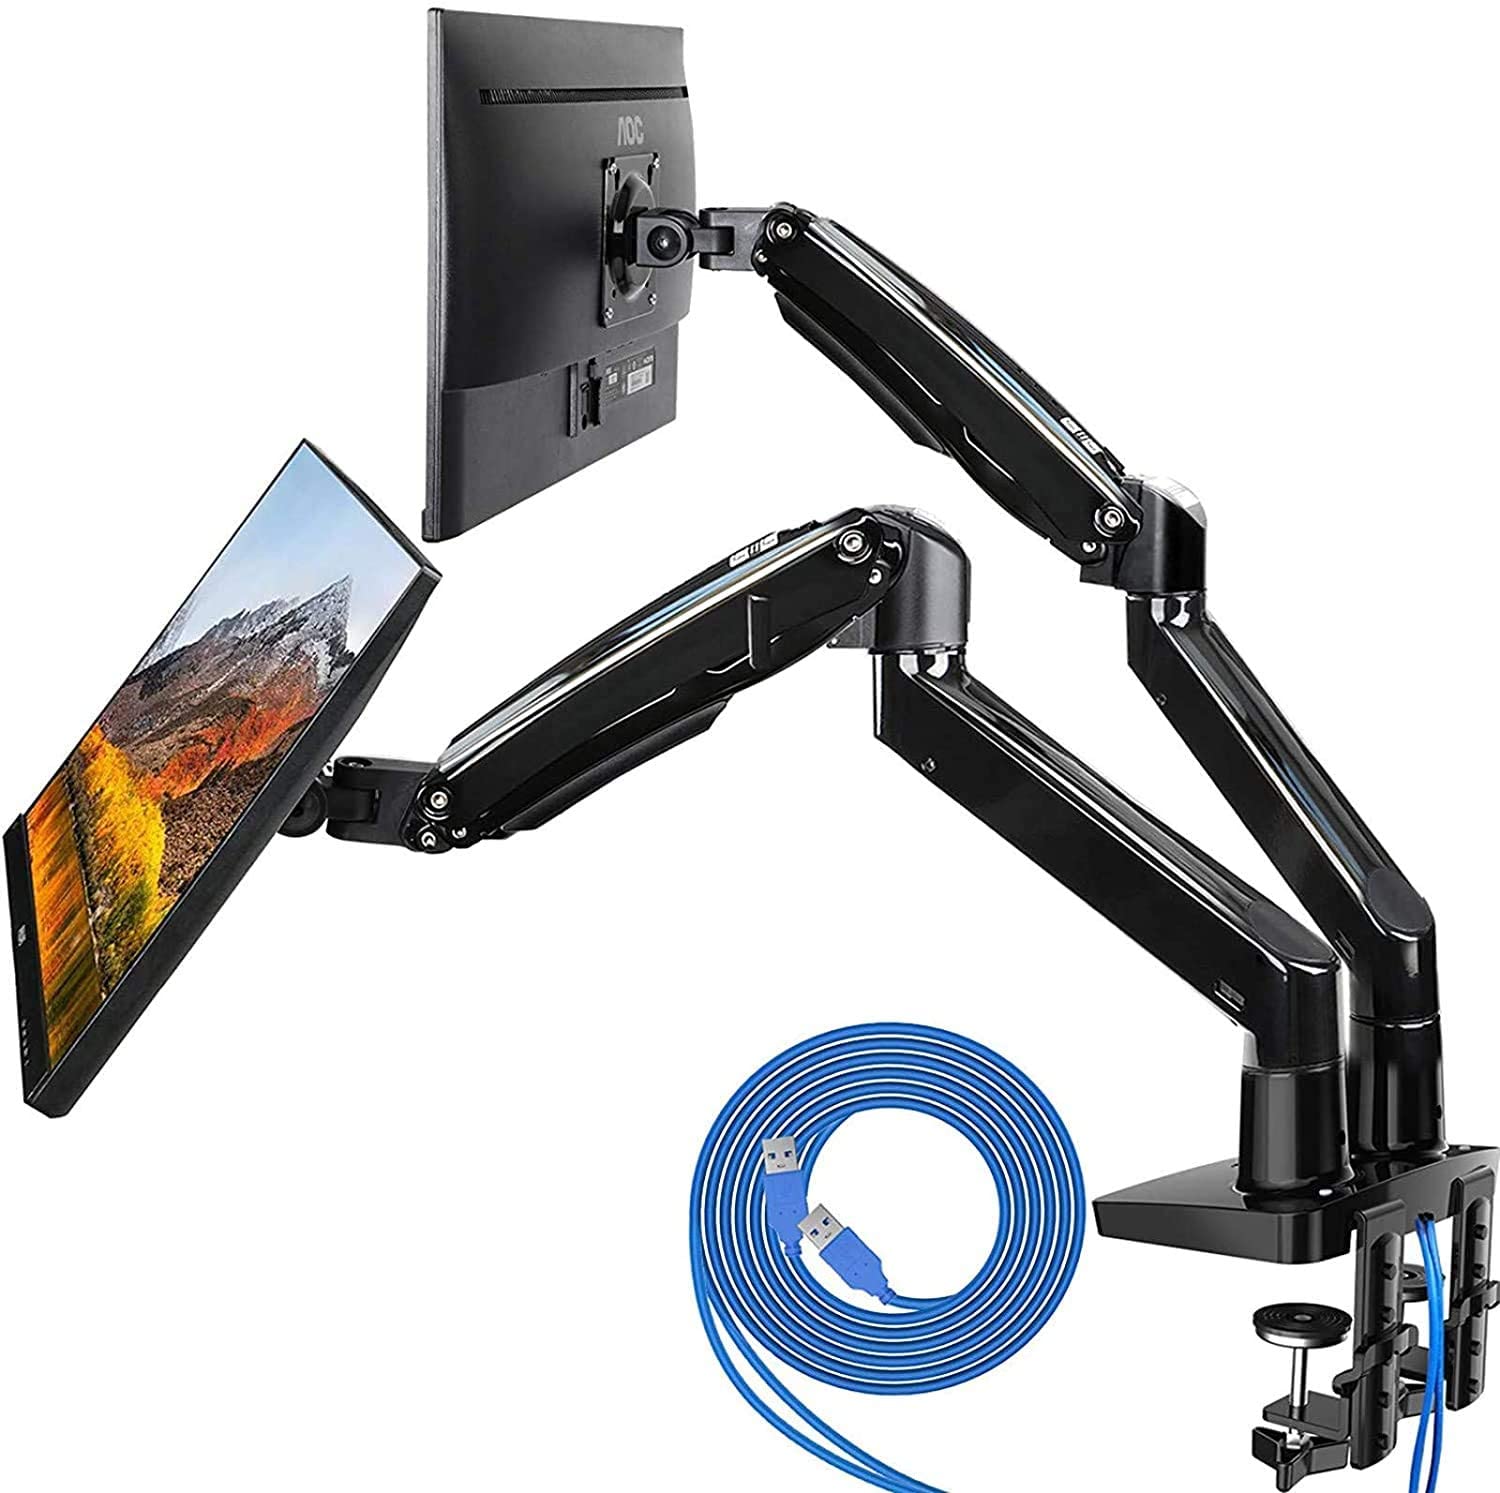 Review of HUANUO Dual Monitor Mount Stand - Long Double Arm Gas Spring Monitor Desk Mount for 2 Screens